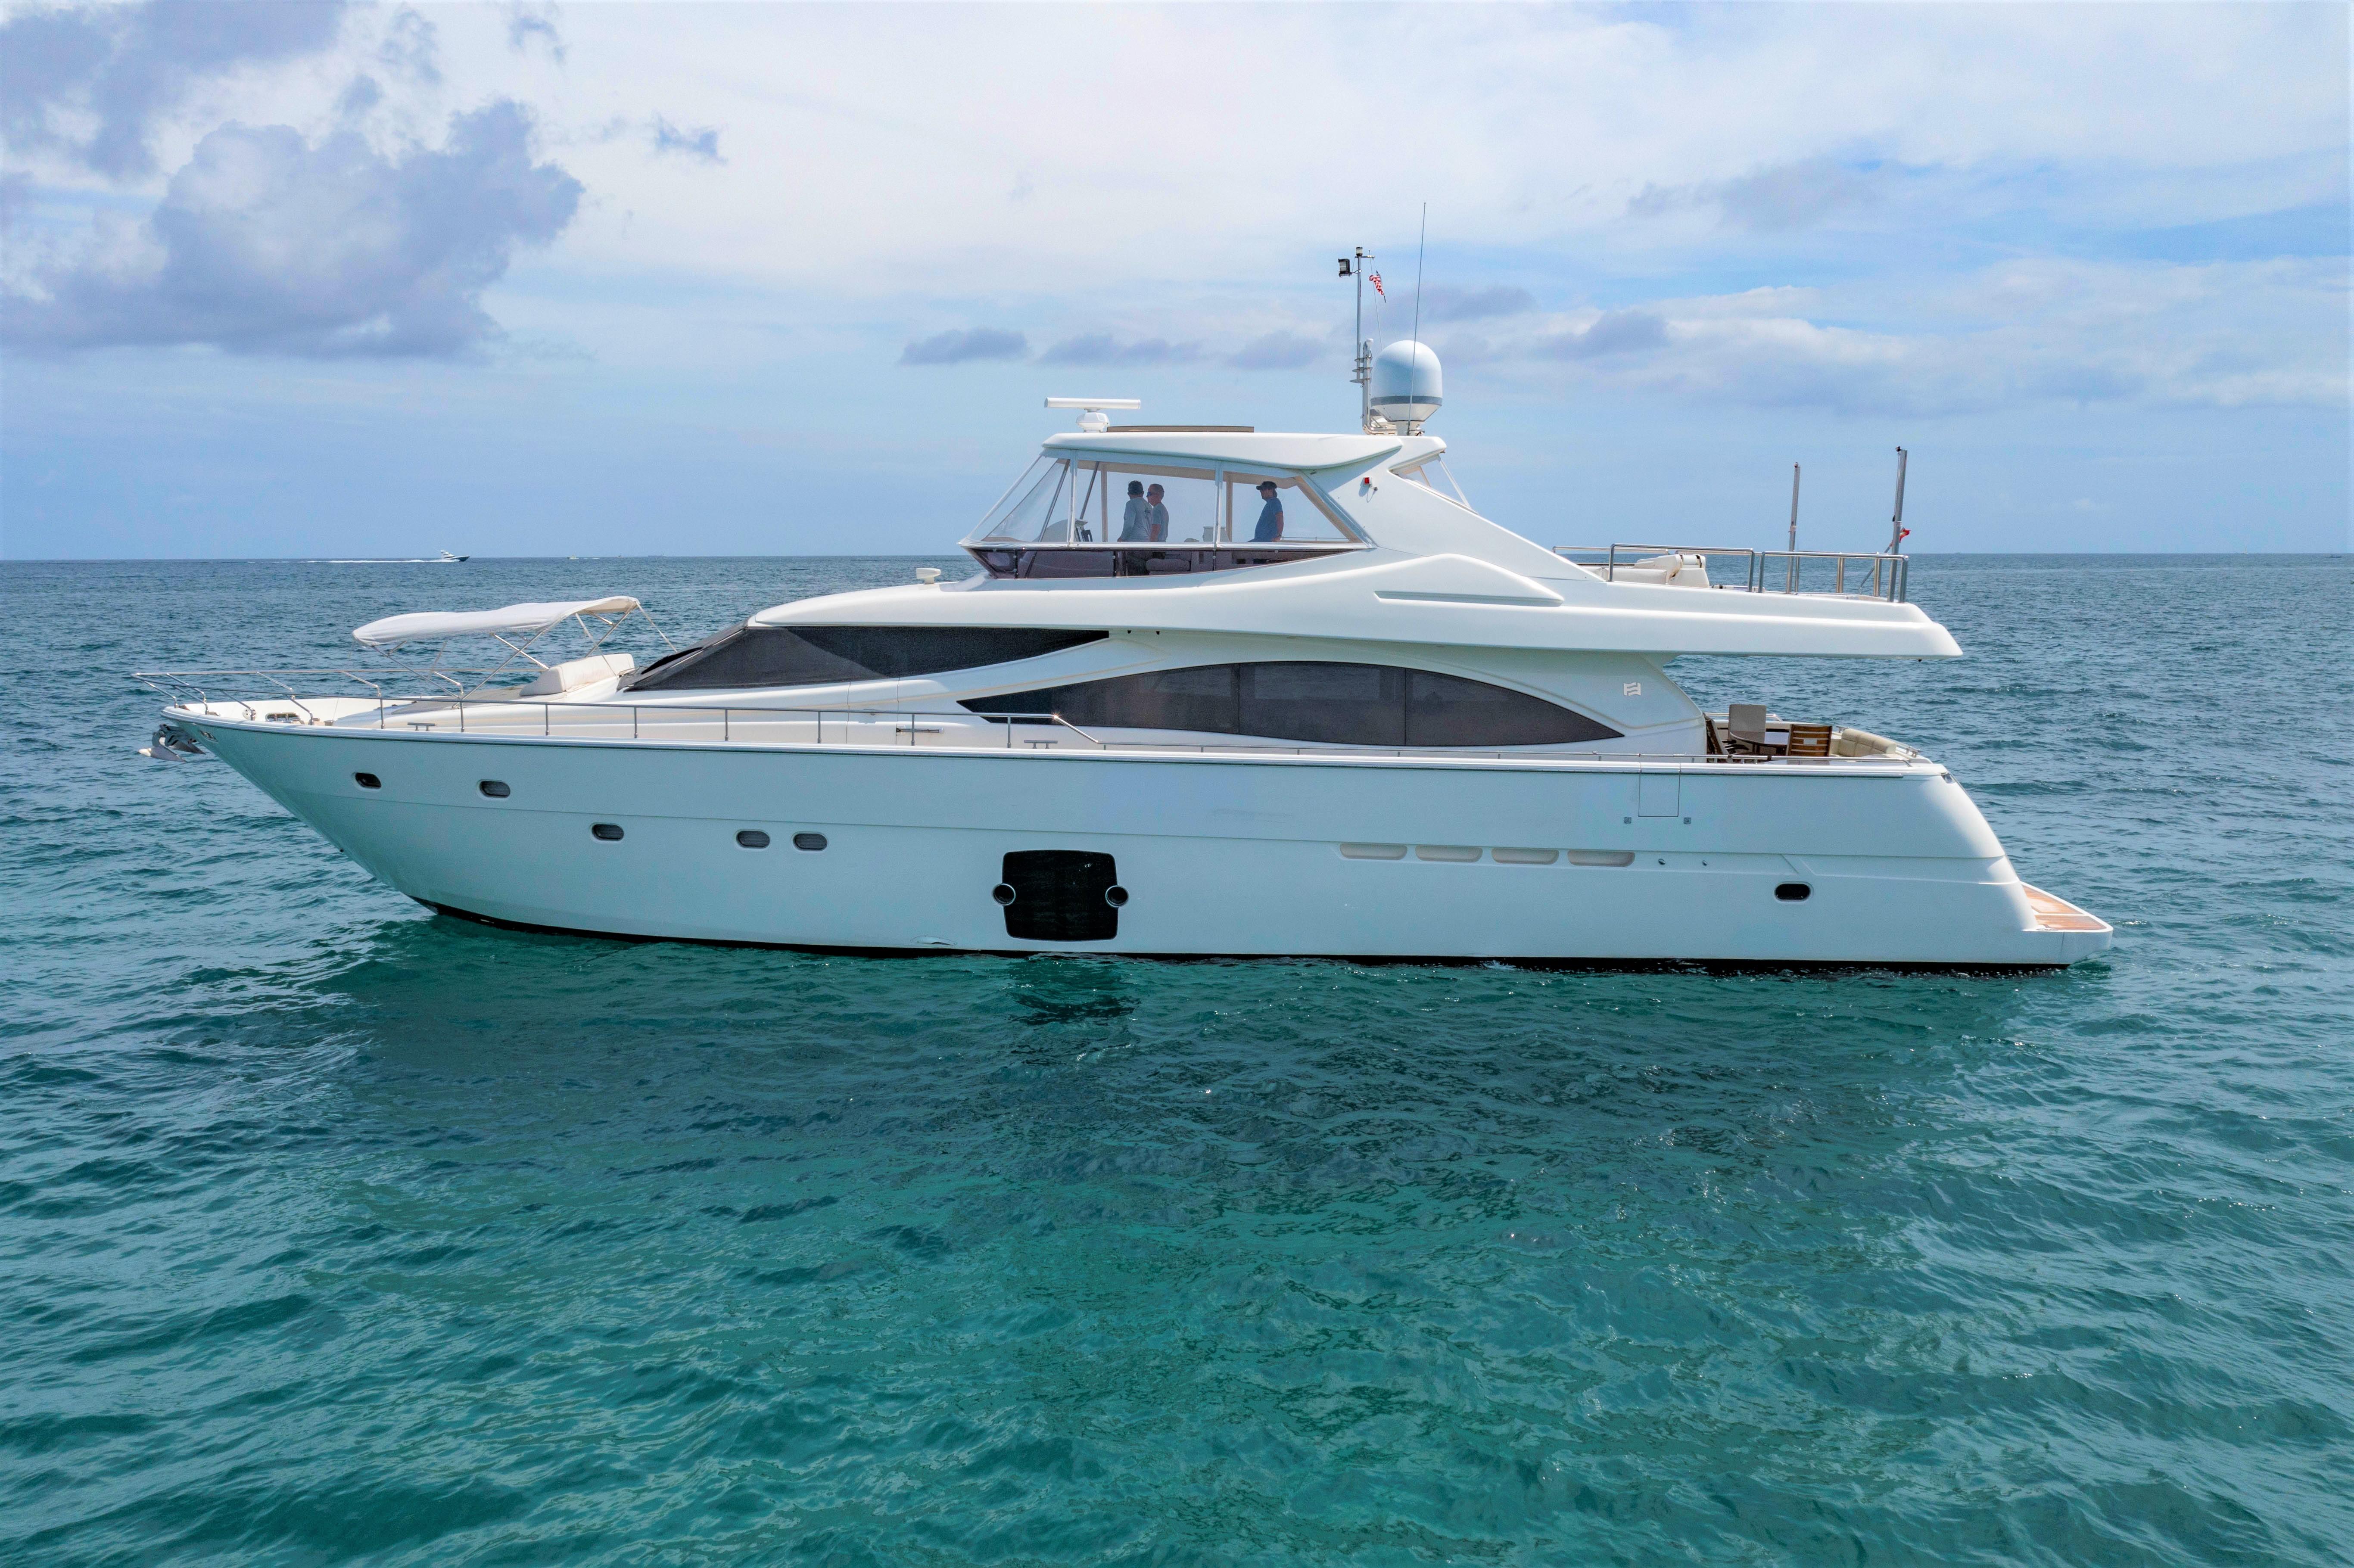 2010 Ferretti Yachts 83 830HT on the water